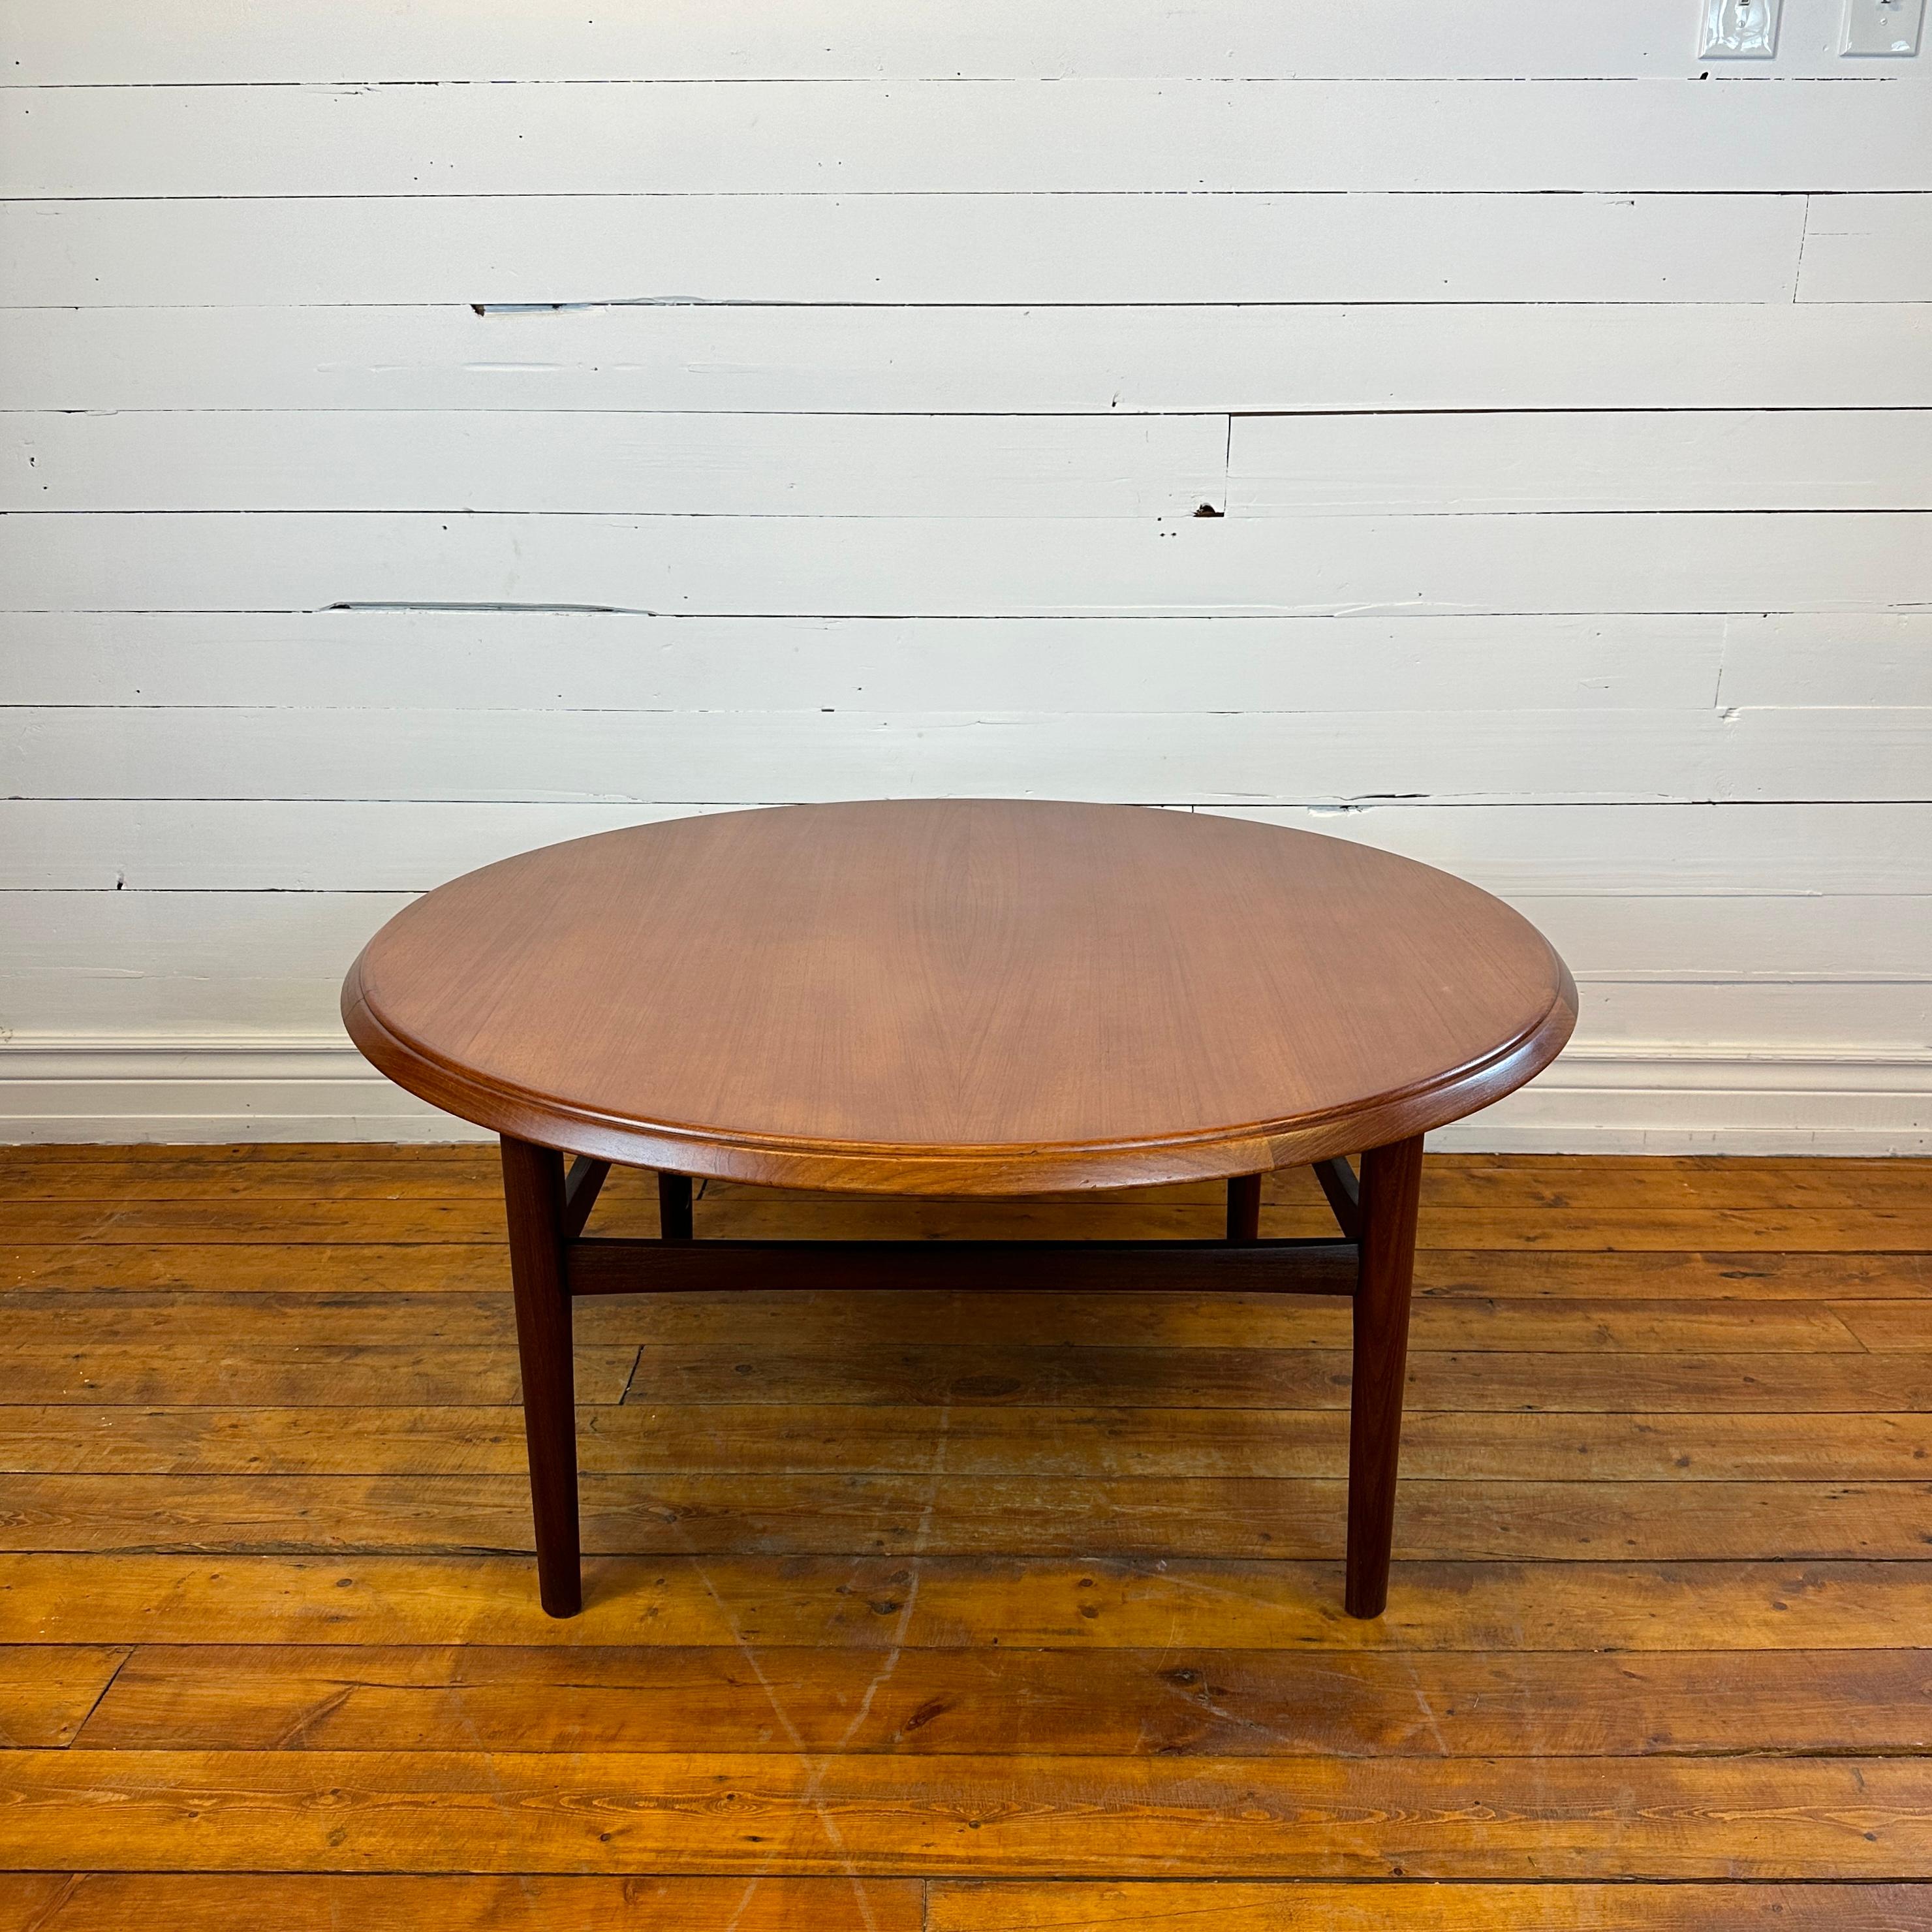 Condition: Refinished Surface

Dimensions: 41” D x 18.75” H

Description: A great quality teak coffee table. Made in Norway, Circa 1960s-70s. Great condition with a new lacquer finish on surface. Solid teak base and banding.